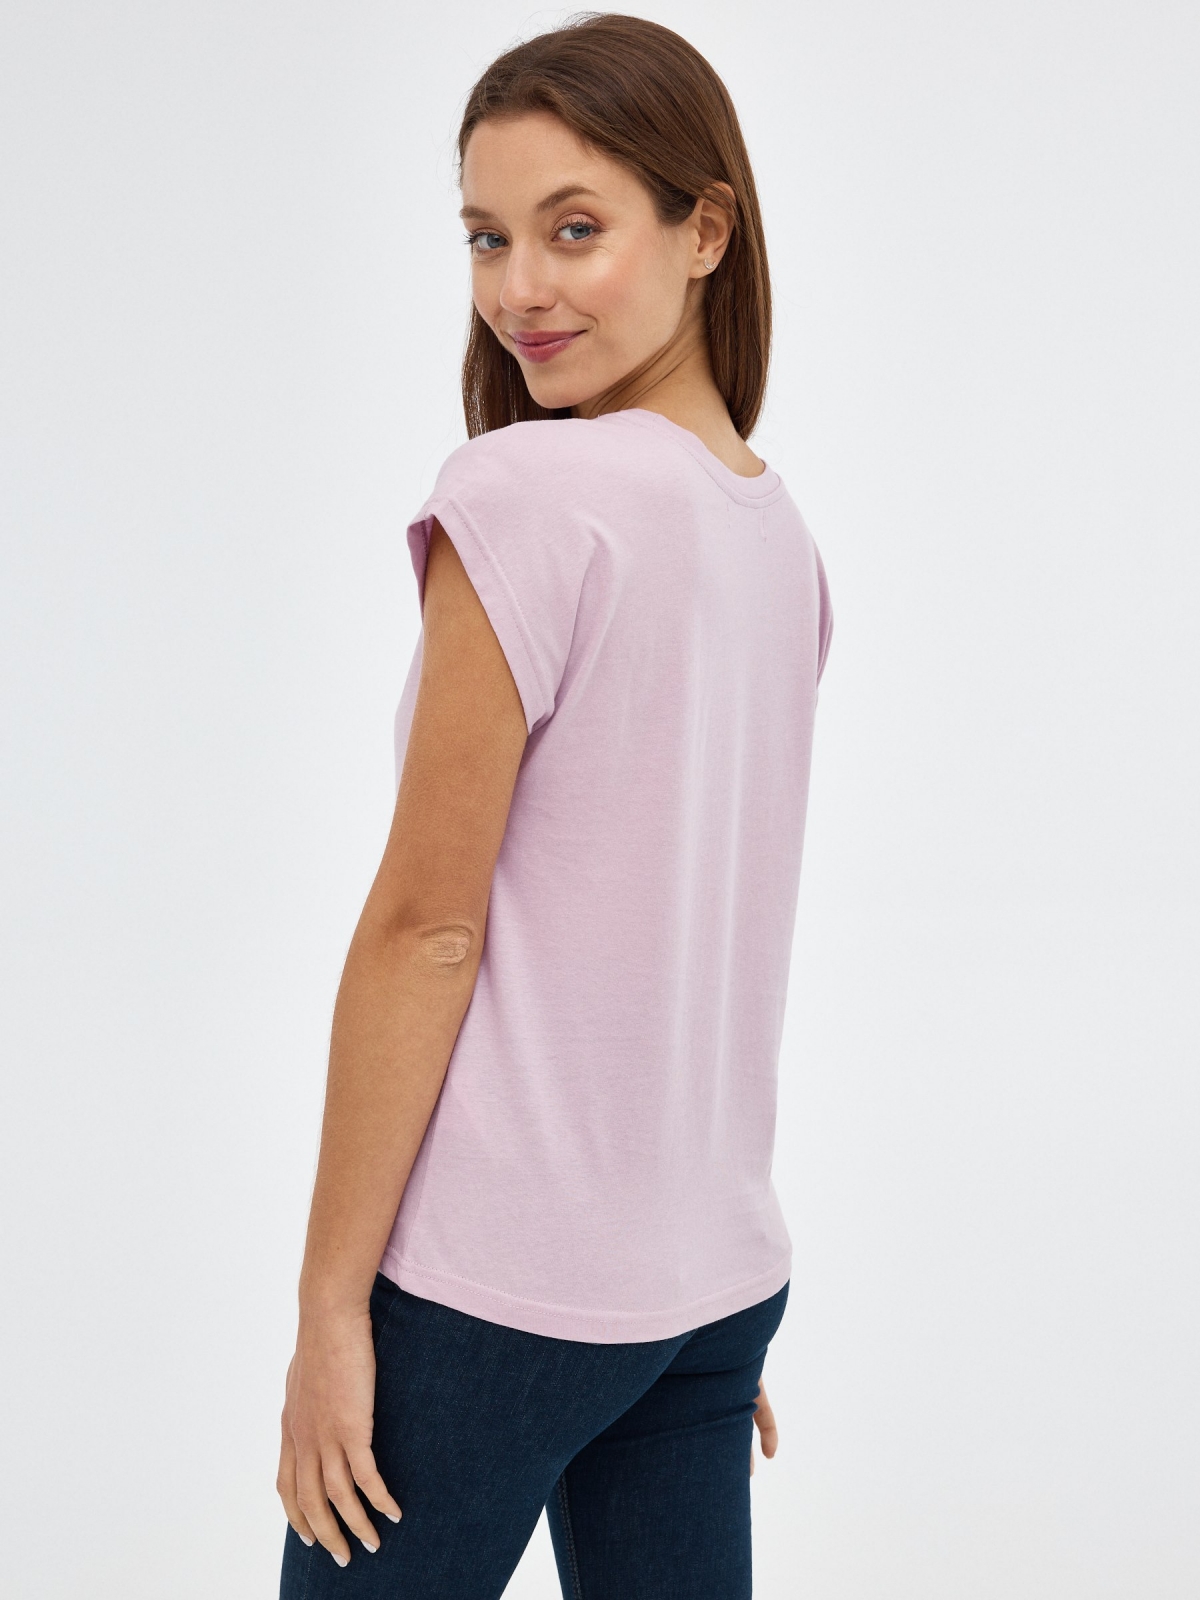 Will Be Fine T-shirt mauve middle back view